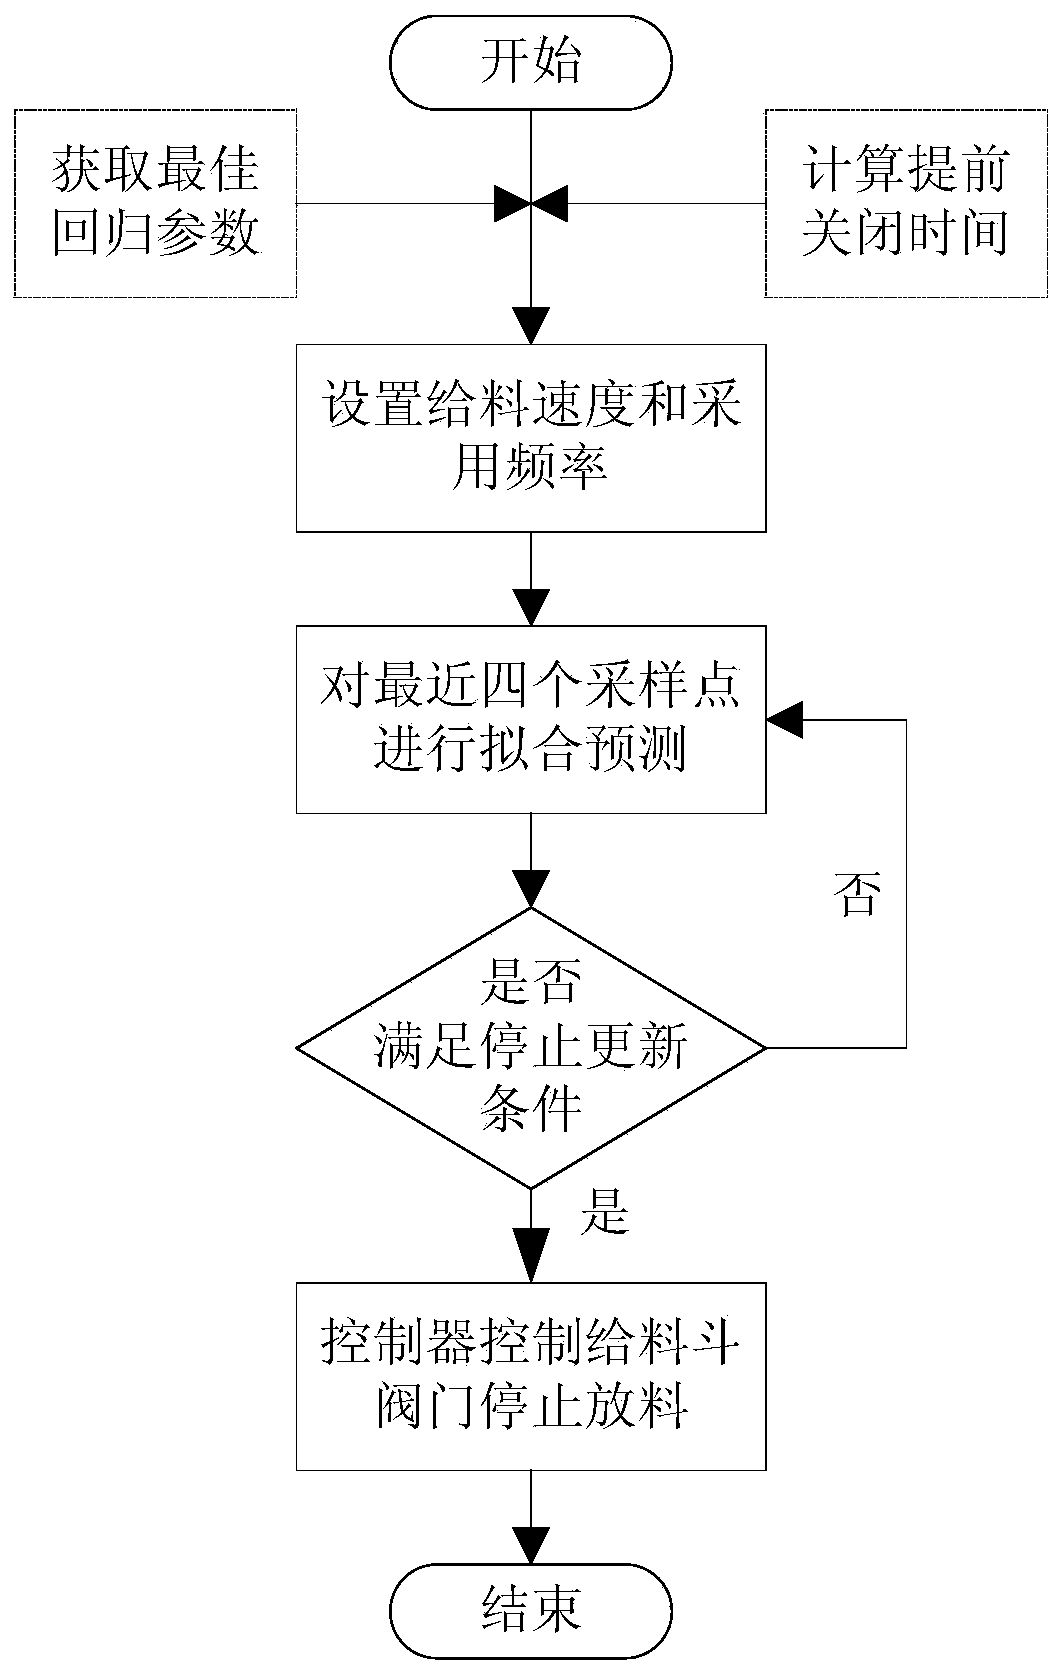 Control method for improving performance of automatic weighing and bagging system